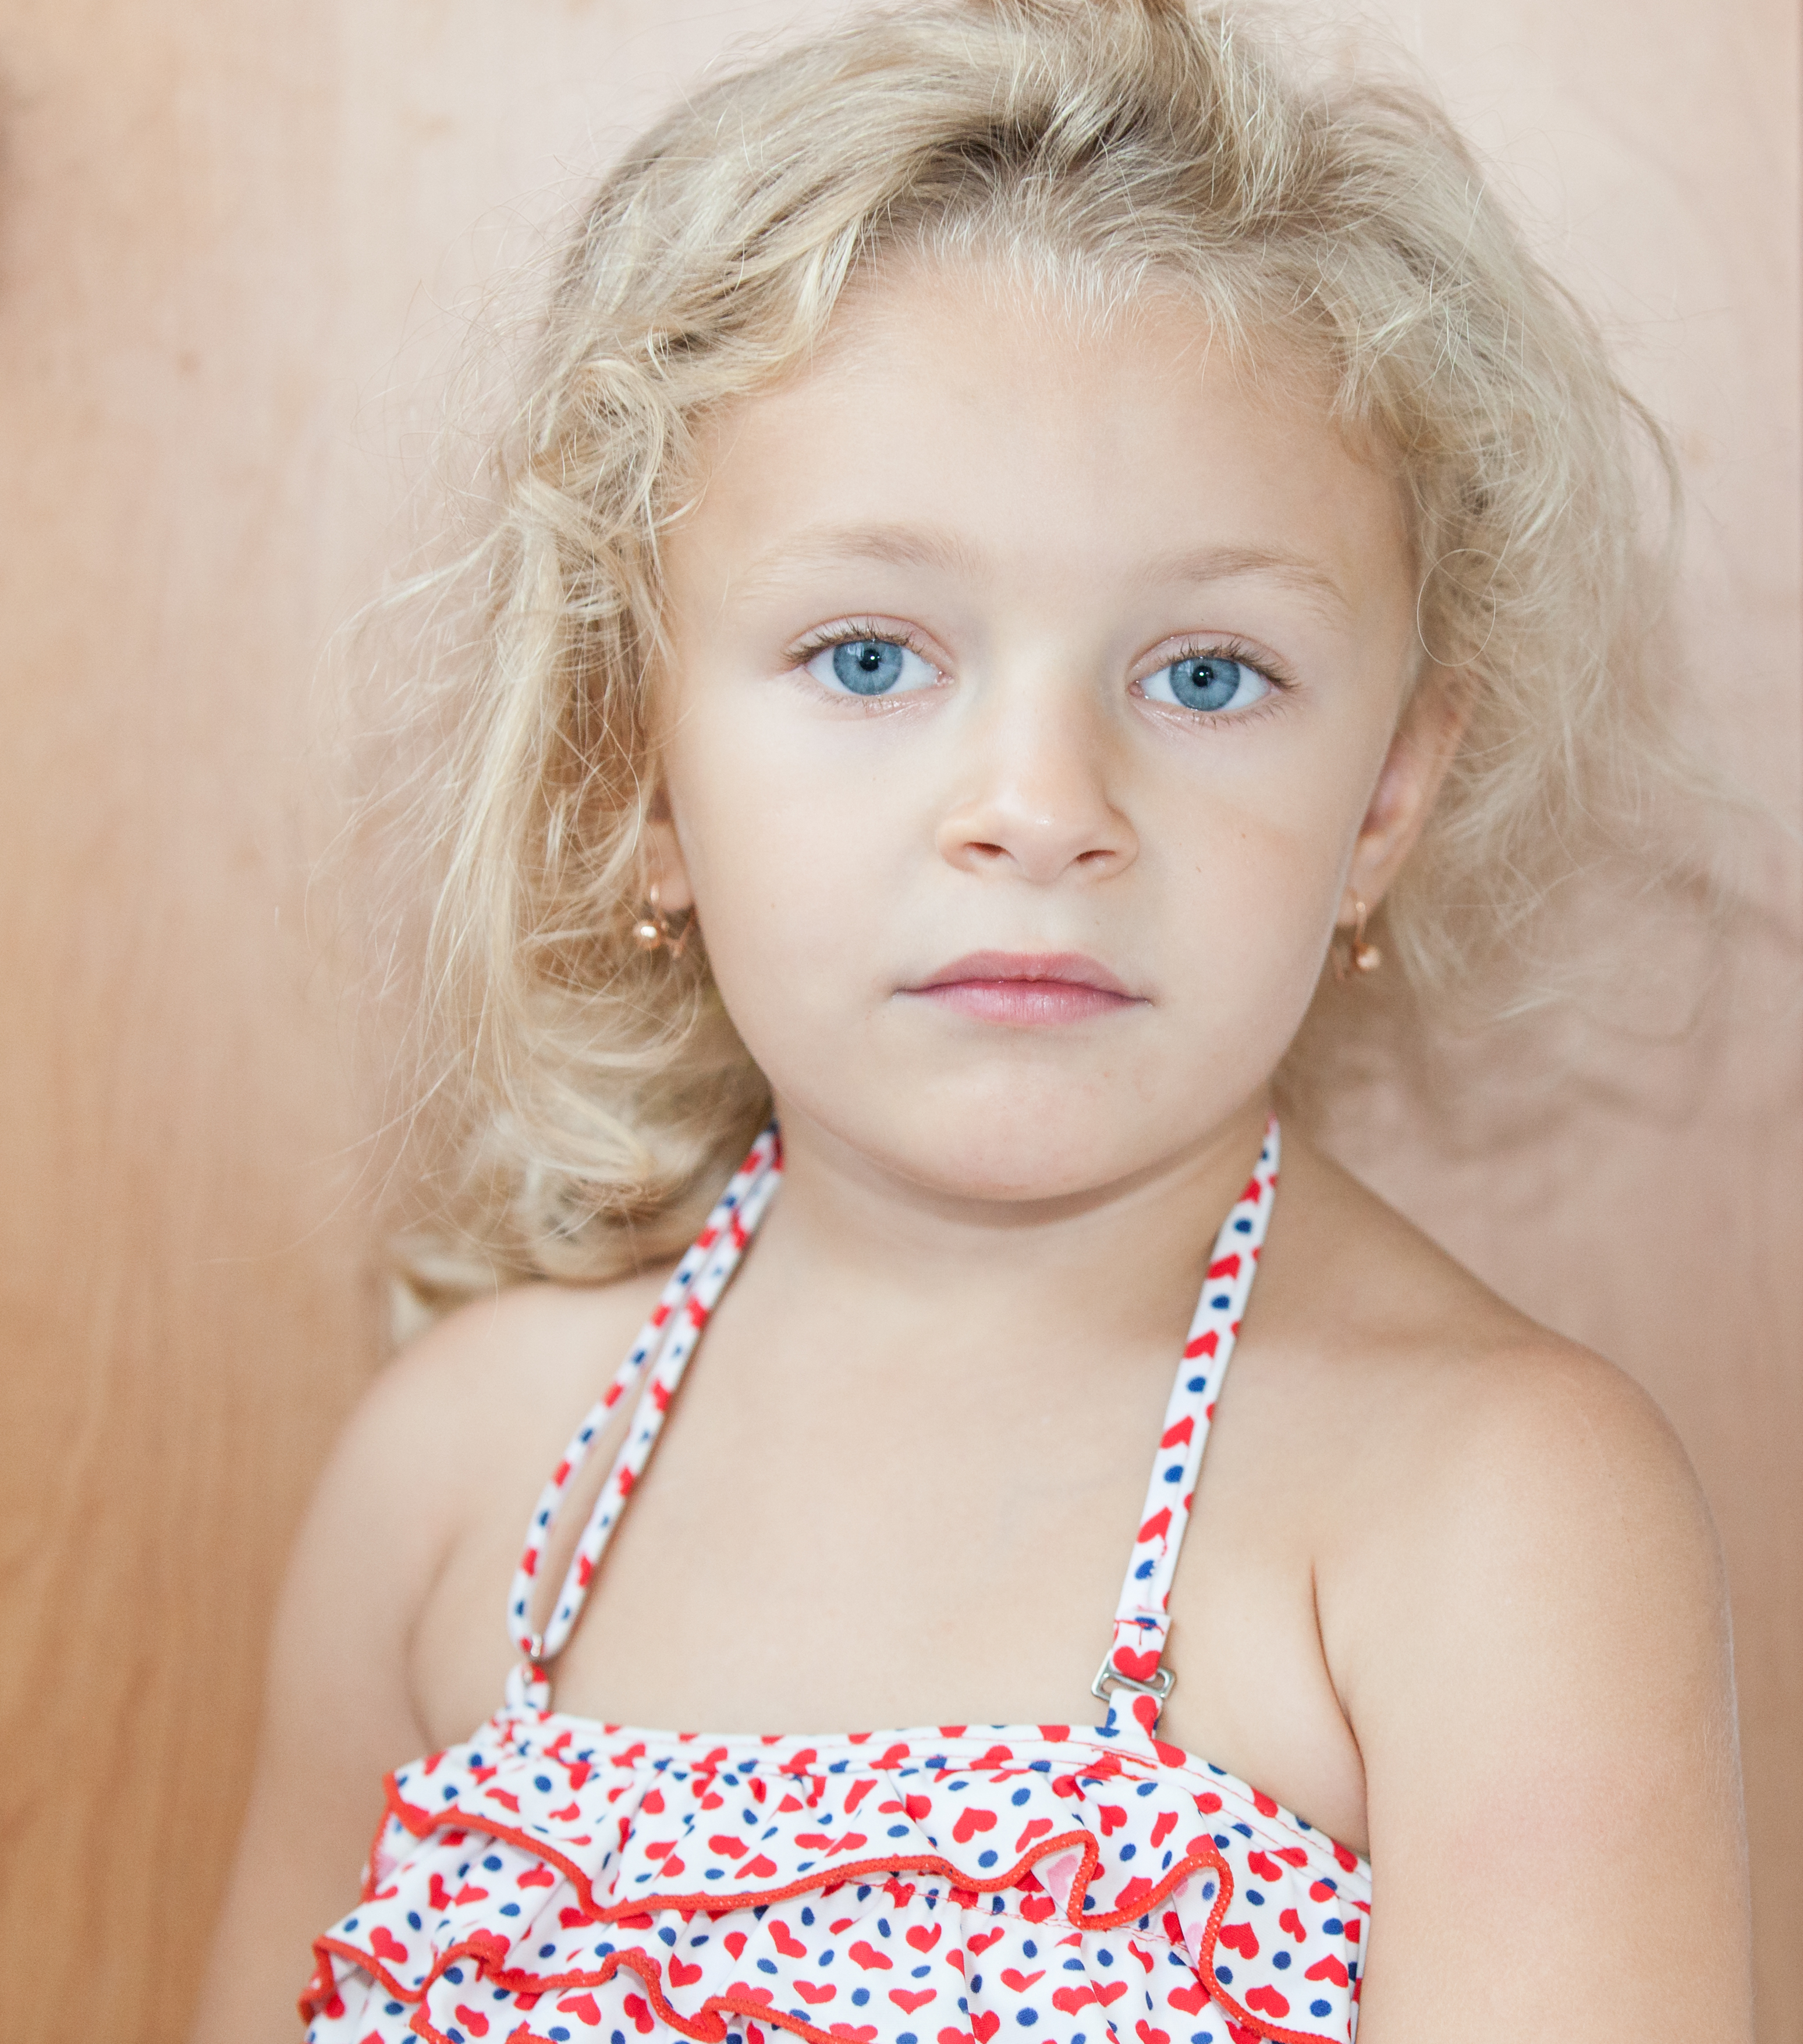 Top 95+ Images little girl with blonde hair and blue eyes Full HD, 2k, 4k